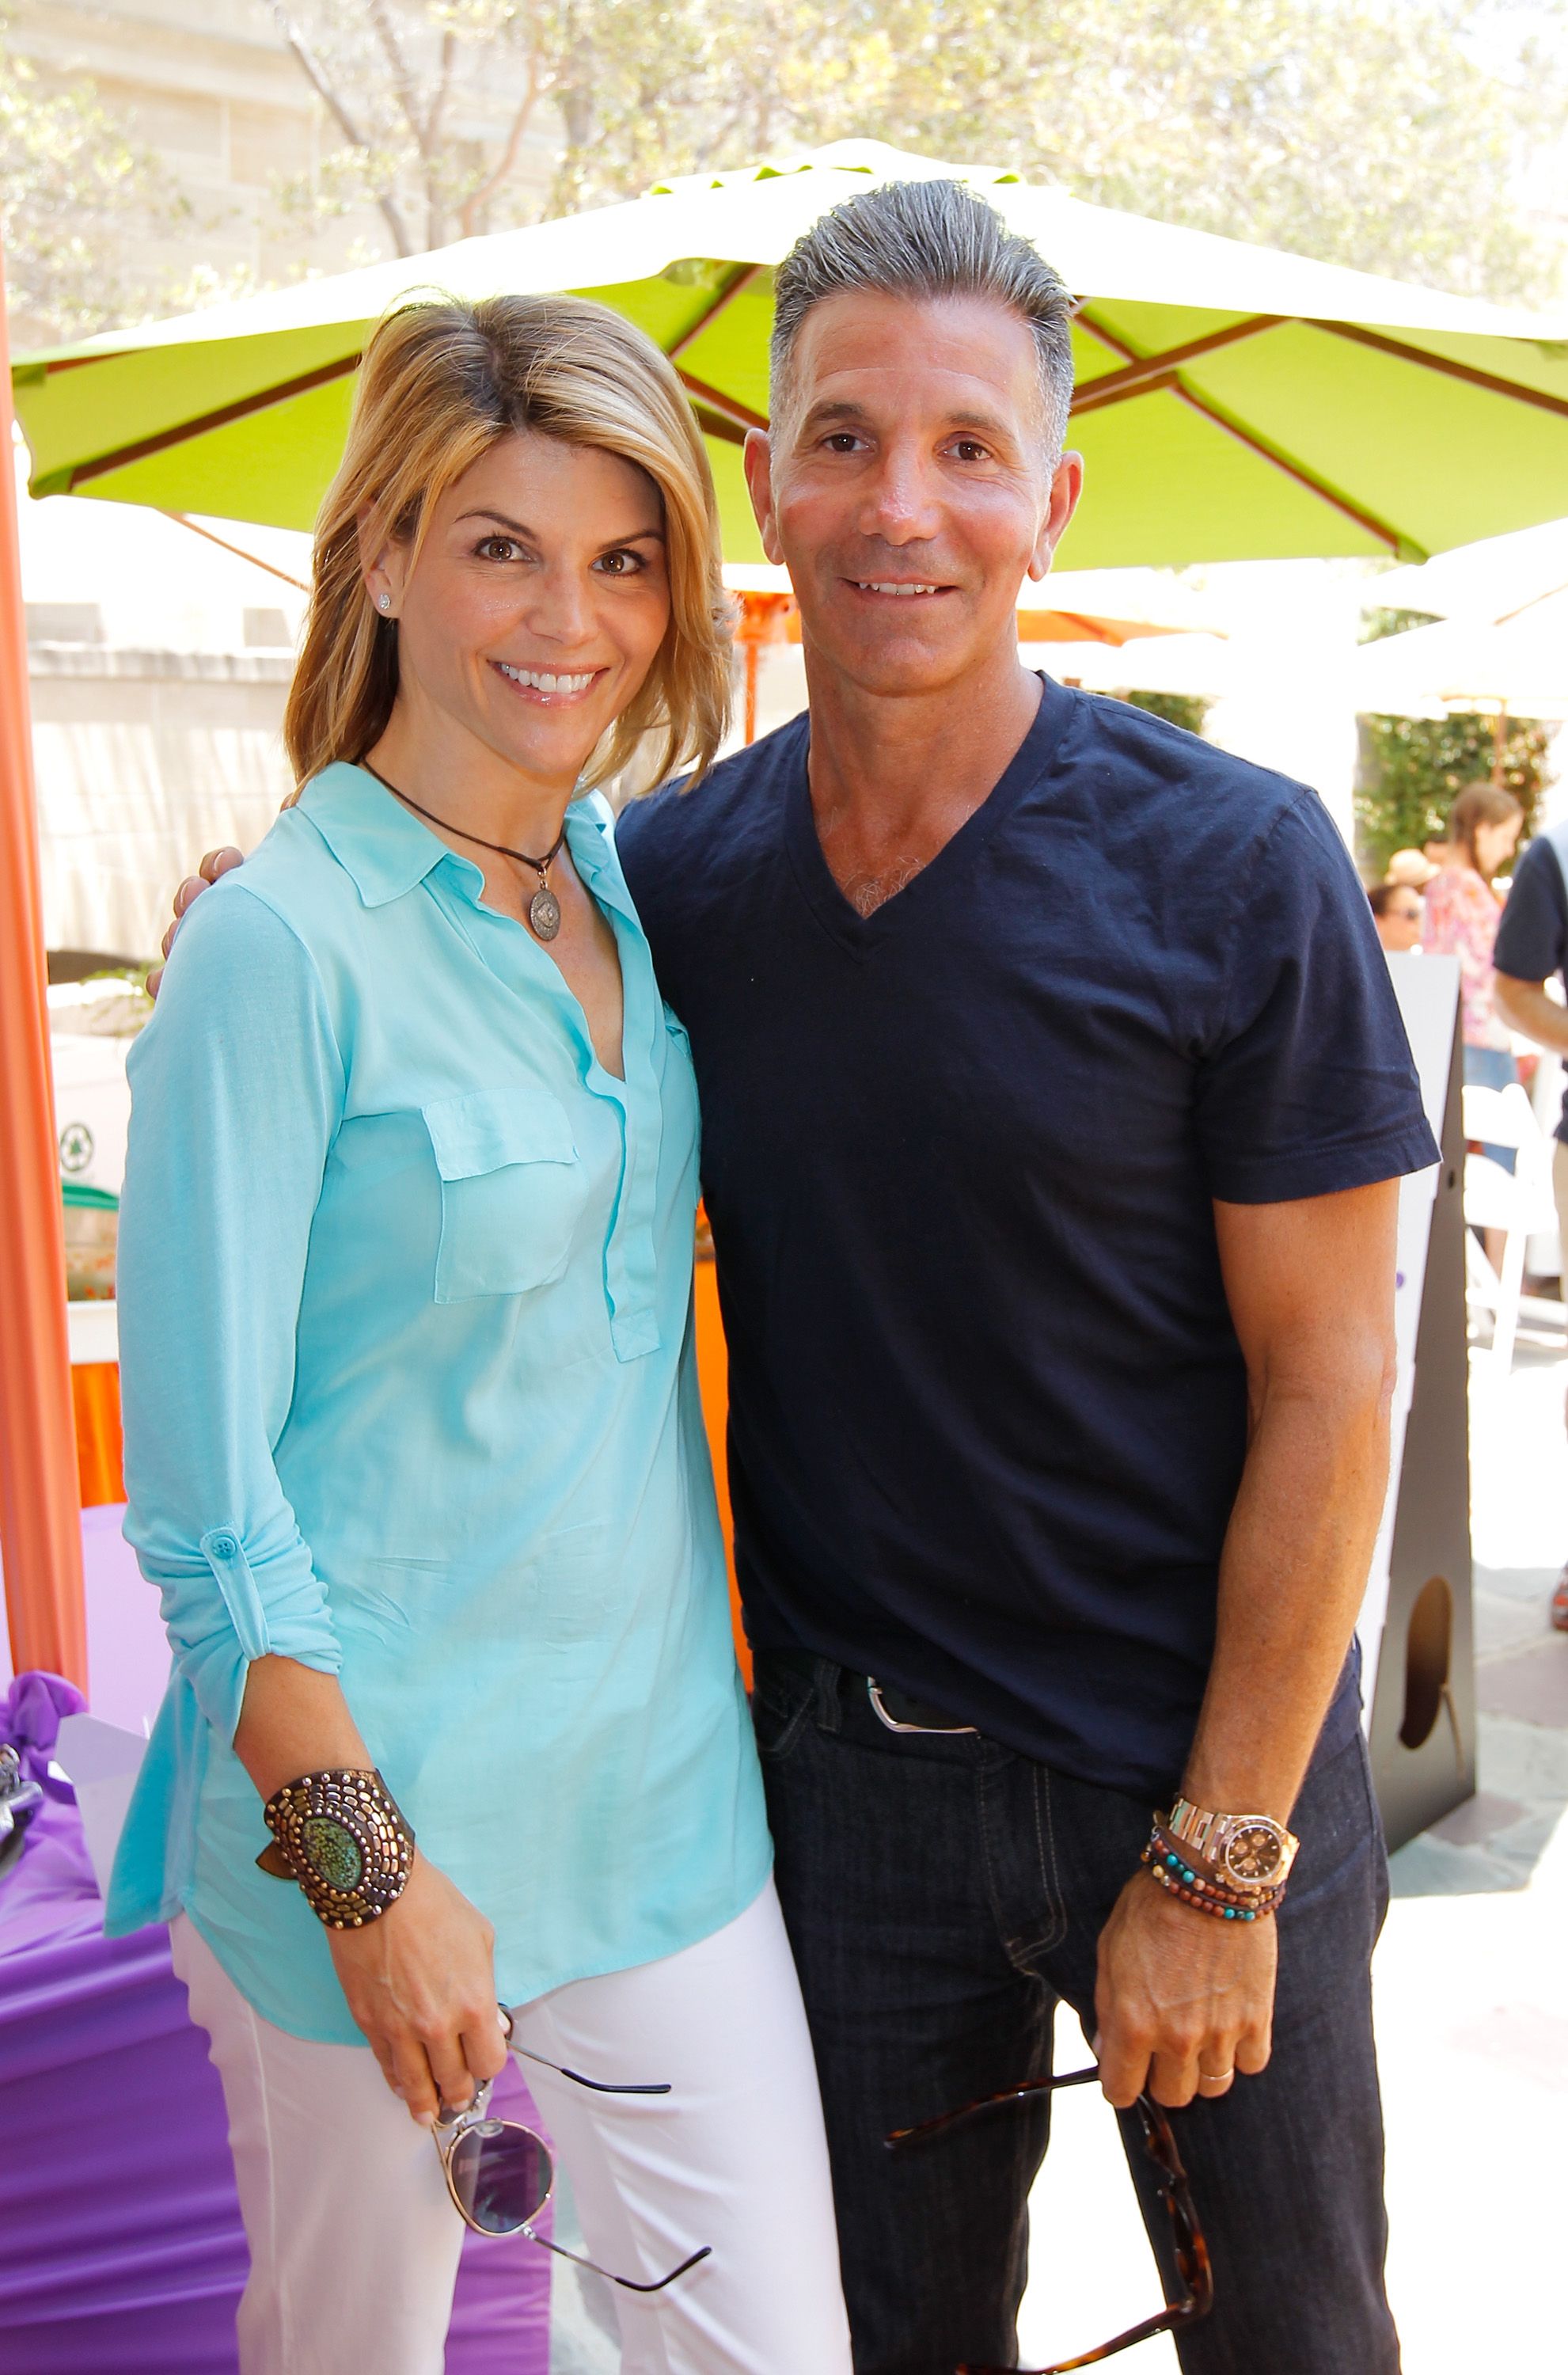  Lori Loughlin and Mossimo Giannulli during the 6th Annual Kidstock Music And Arts Festival Sponsored By Hudson Jeans at Greystone Mansion on June 3, 2012 in Beverly Hills, California. | Source: Getty Images